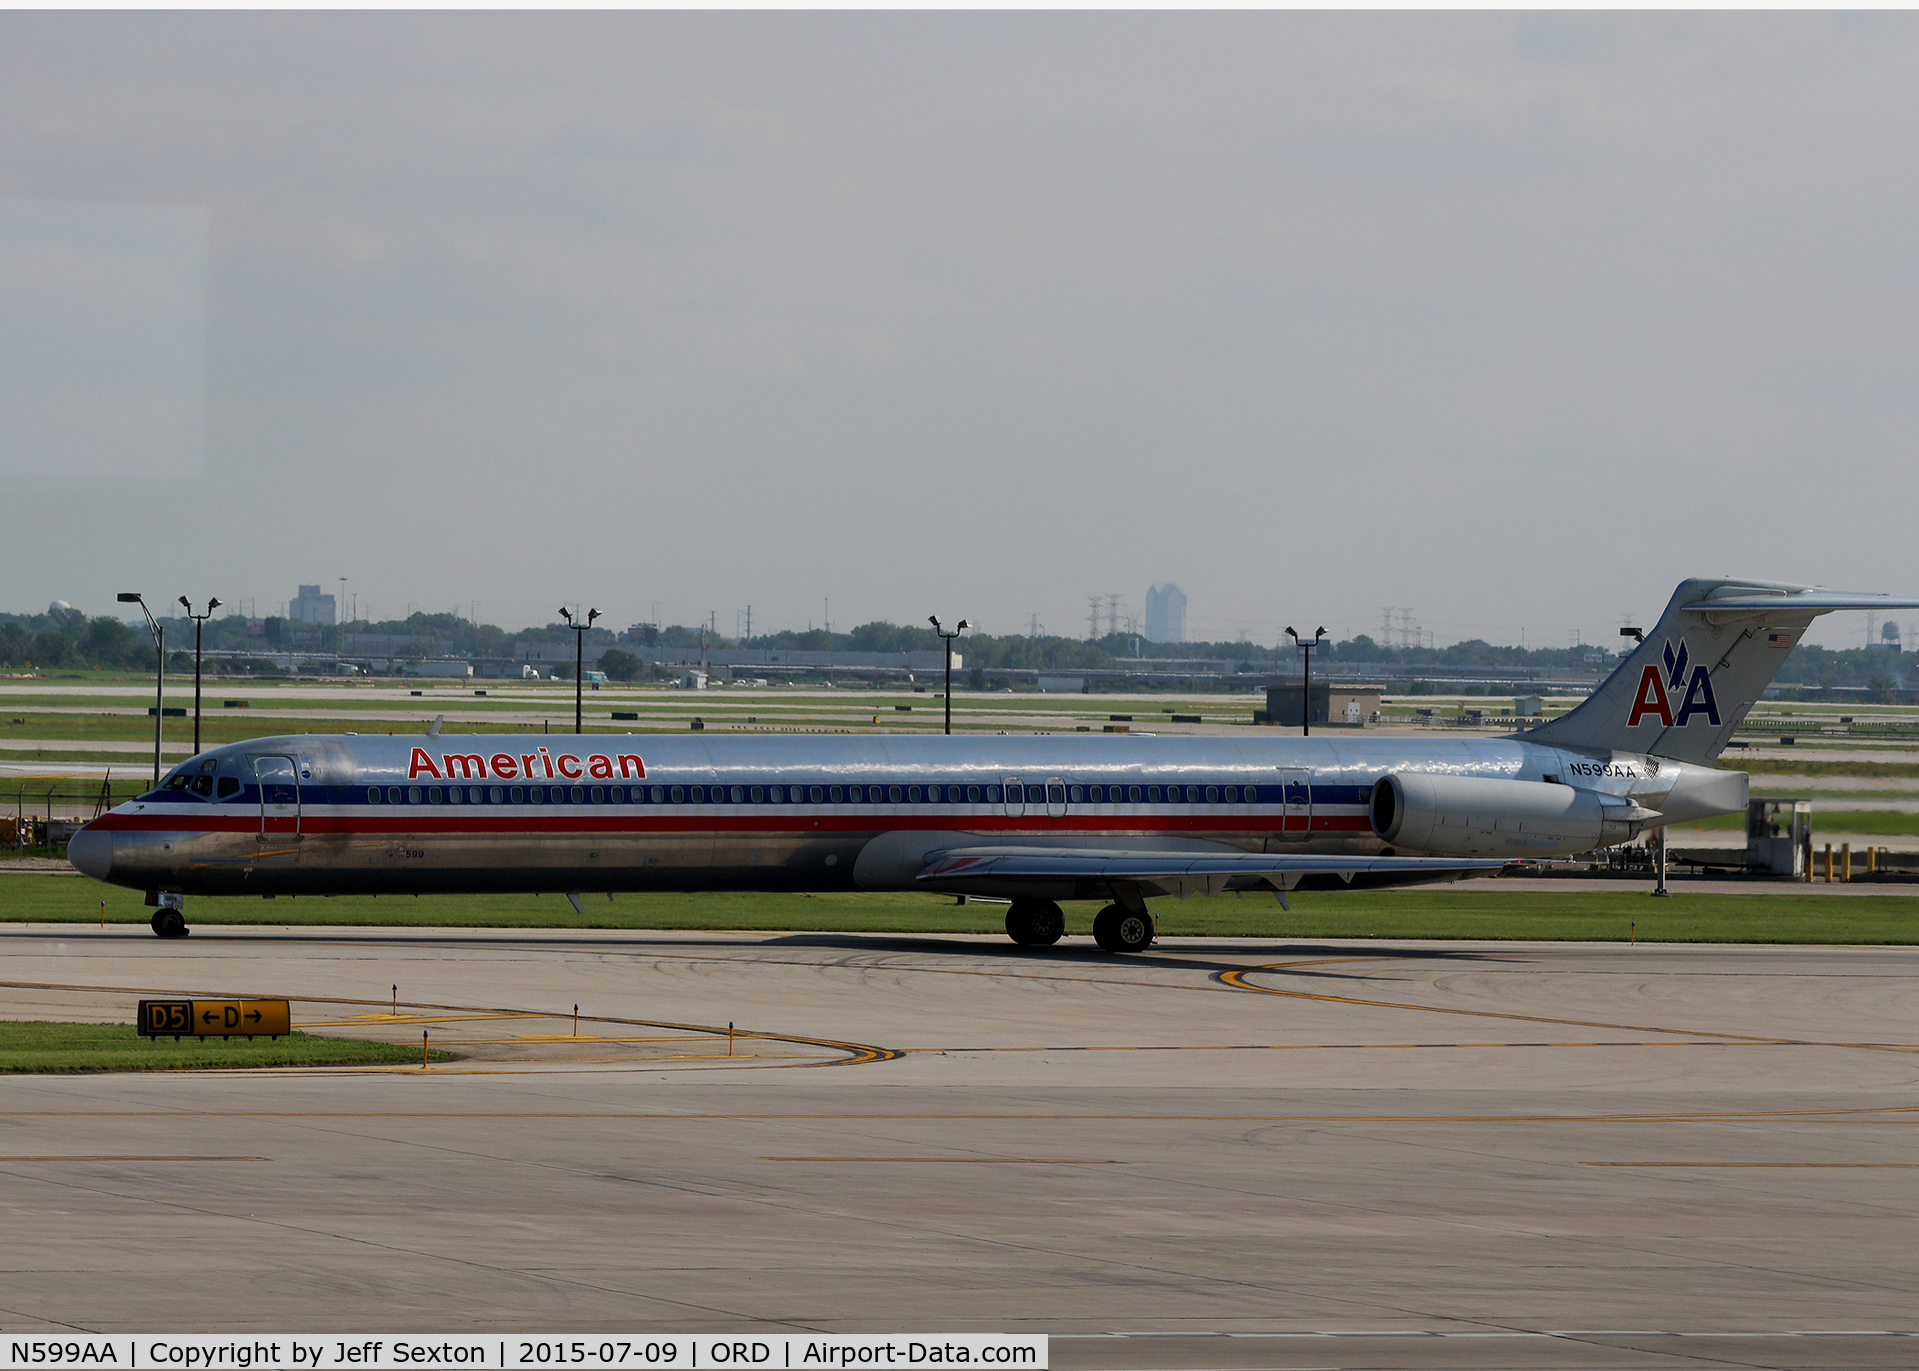 N599AA, 1992 McDonnell Douglas MD-83 (DC-9-83) C/N 53289, Taxiing at ORD